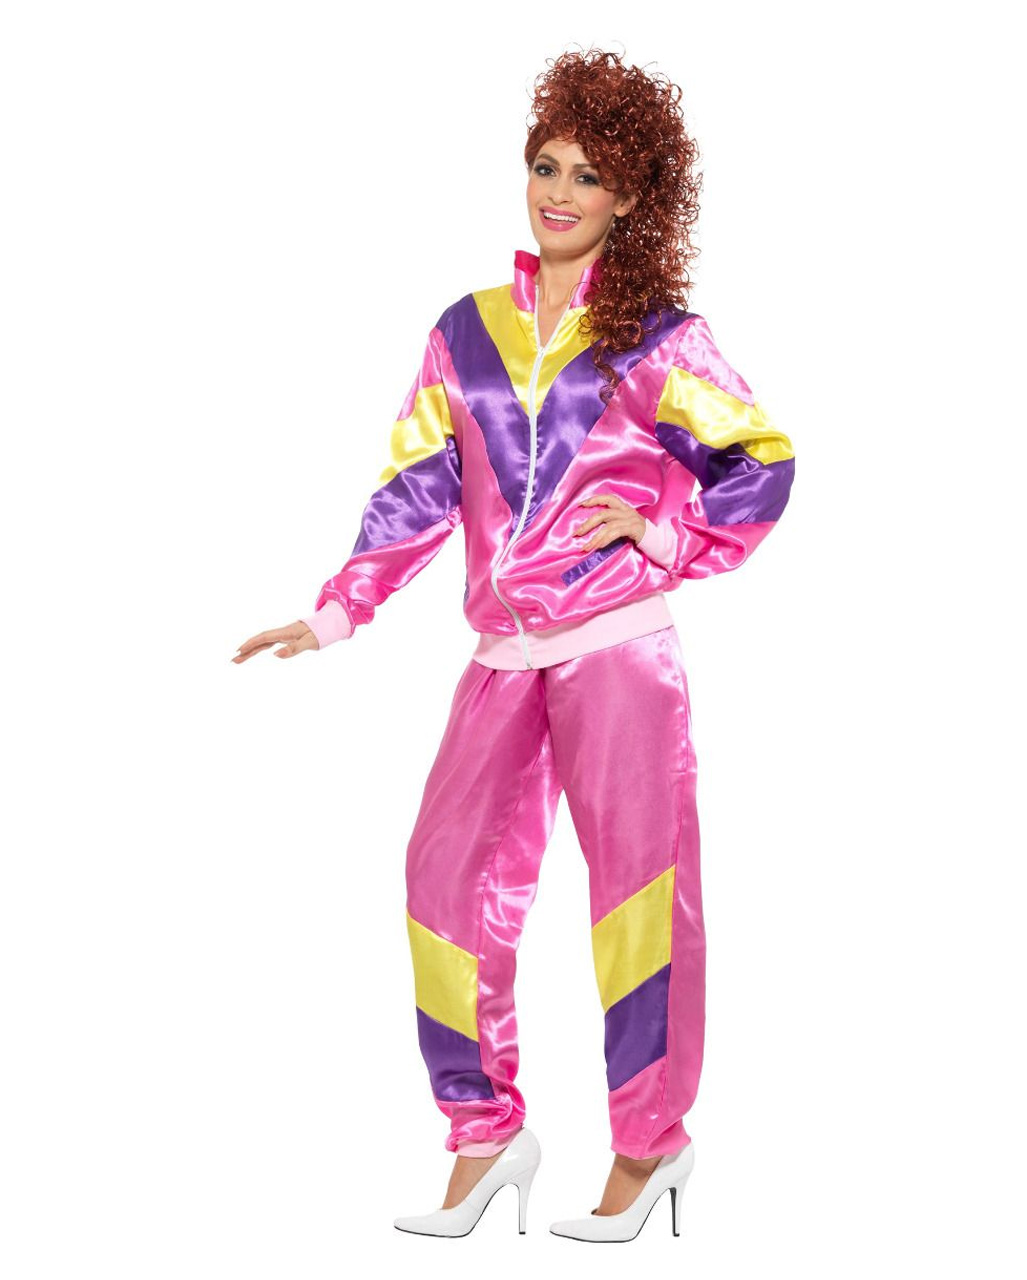 Buy > 80's jogging outfit > in stock